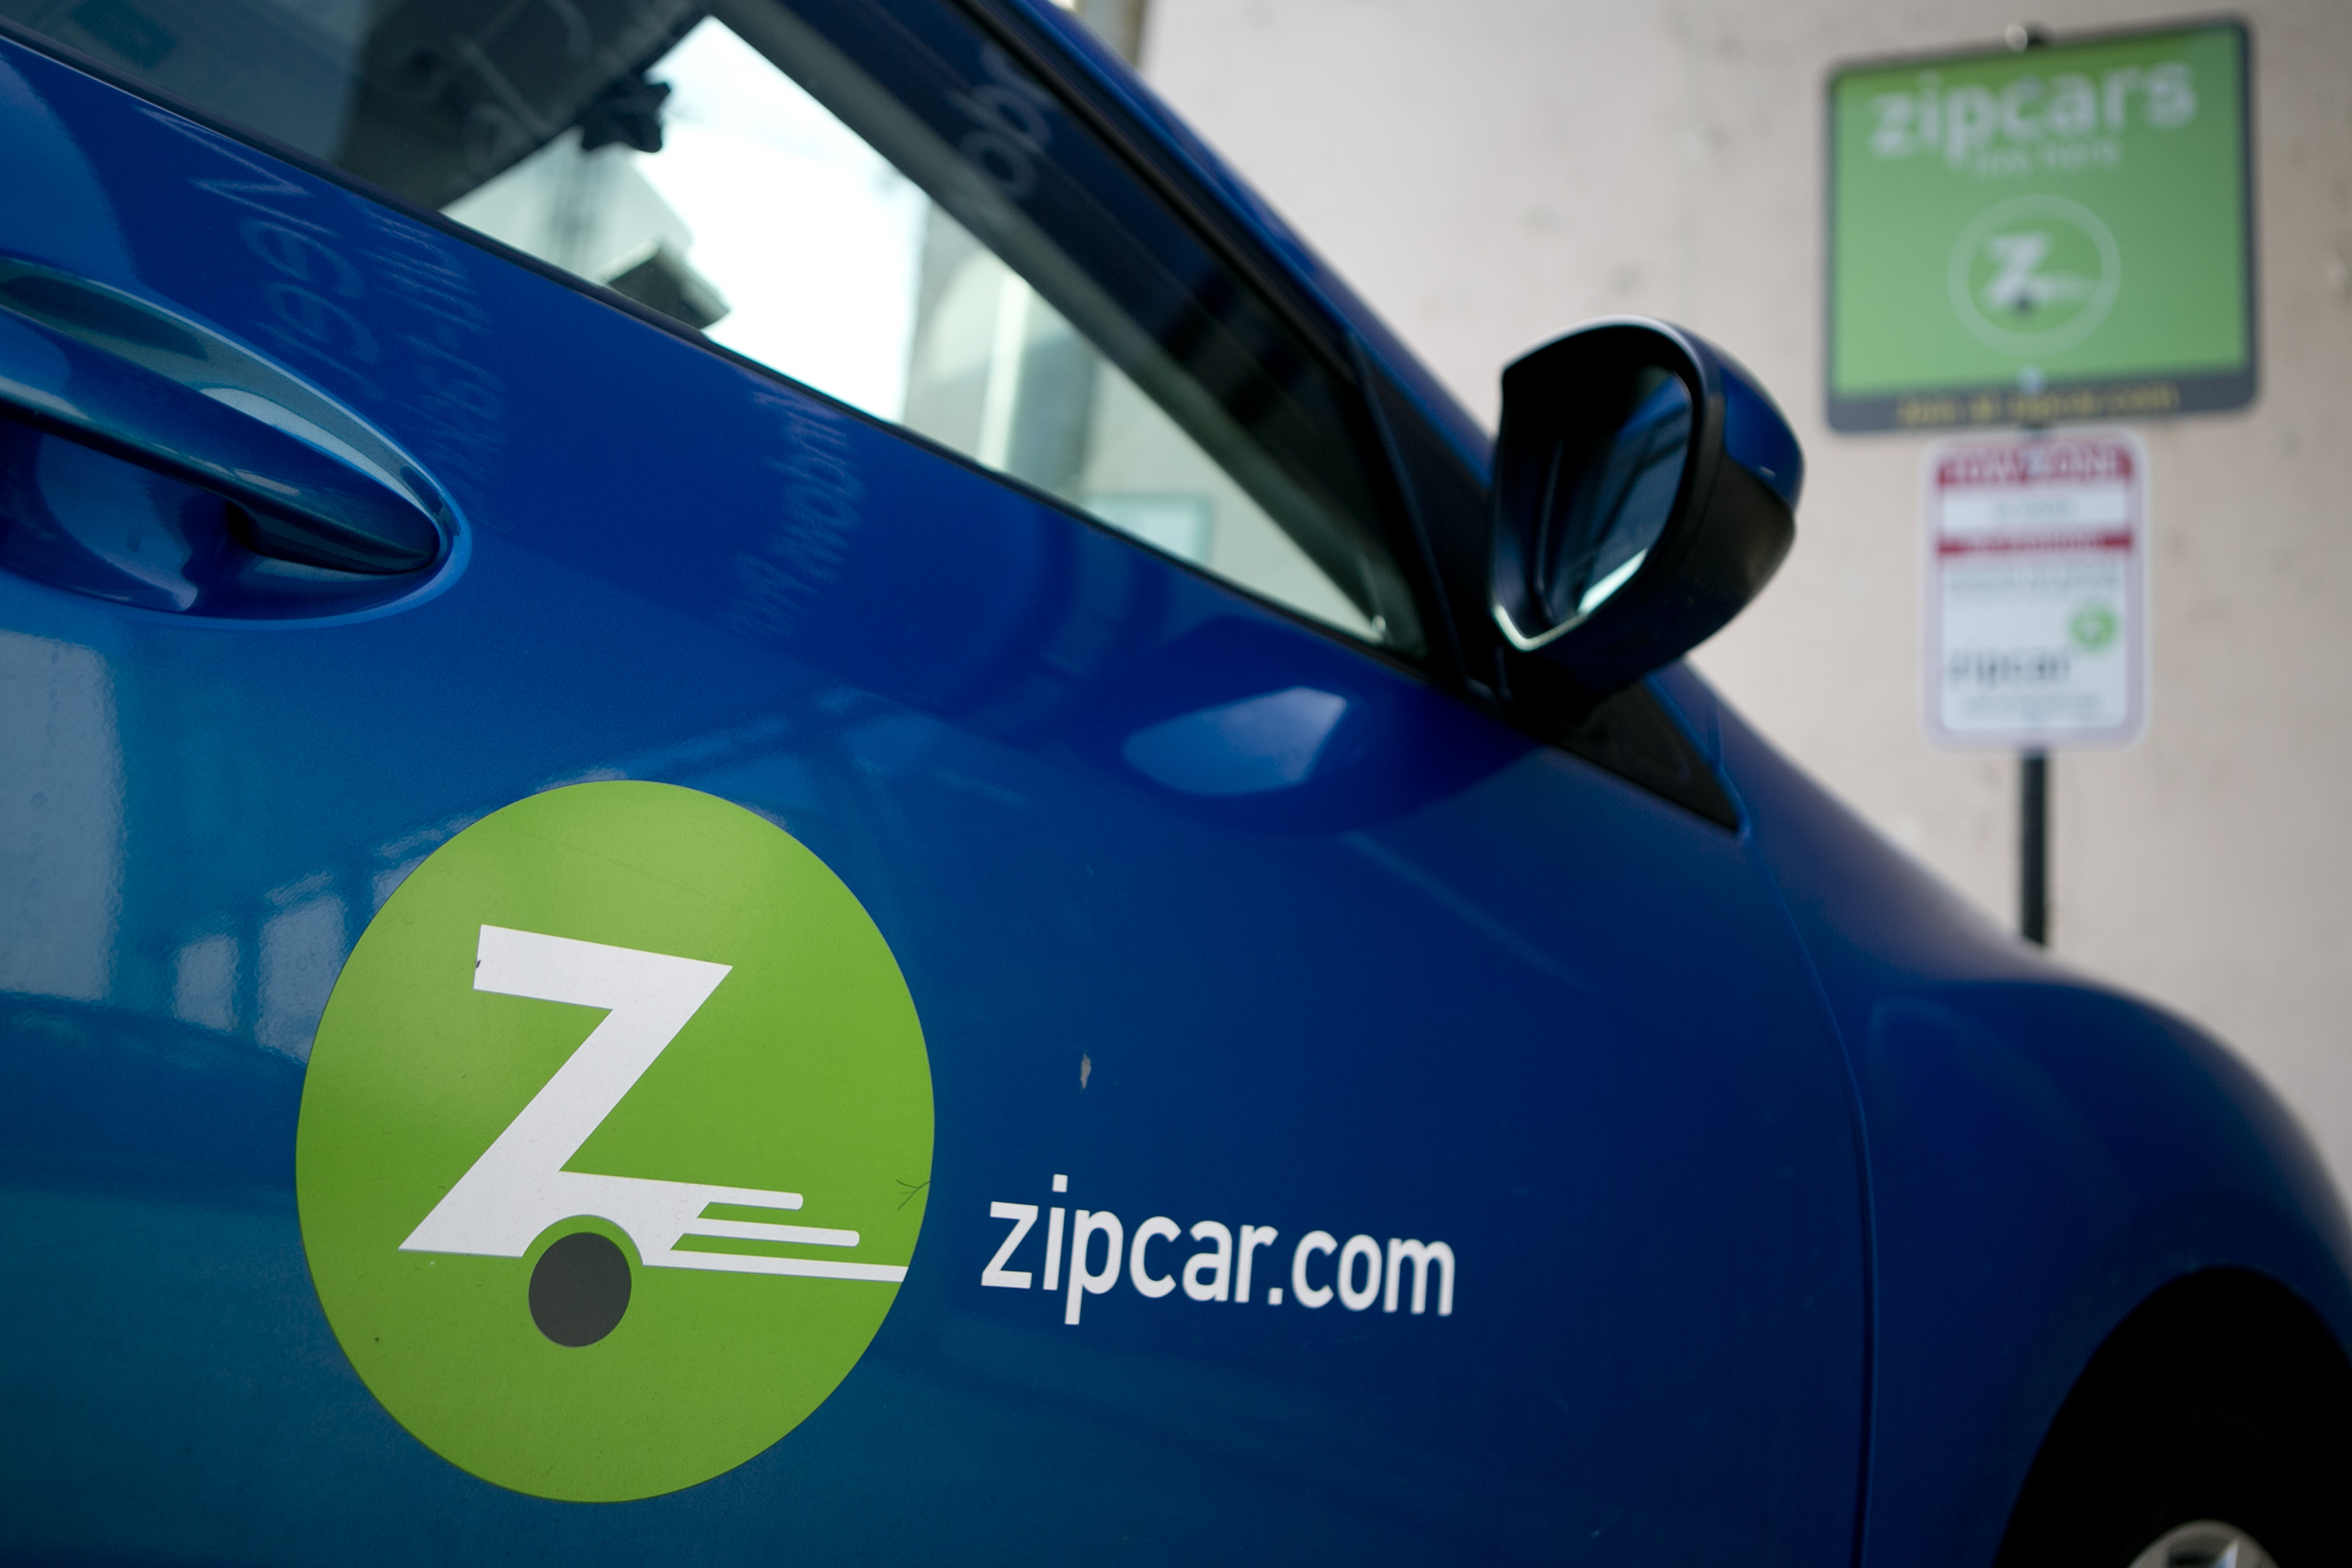 A Mazda Motor Corp. Zipcar Inc. vehicle sits parked in one of the company's spaces in Washington, D.C., U.S., on Wednesday, Jan. 2, 2013. (Bloomberg&mdash;Bloomberg via Getty Images)